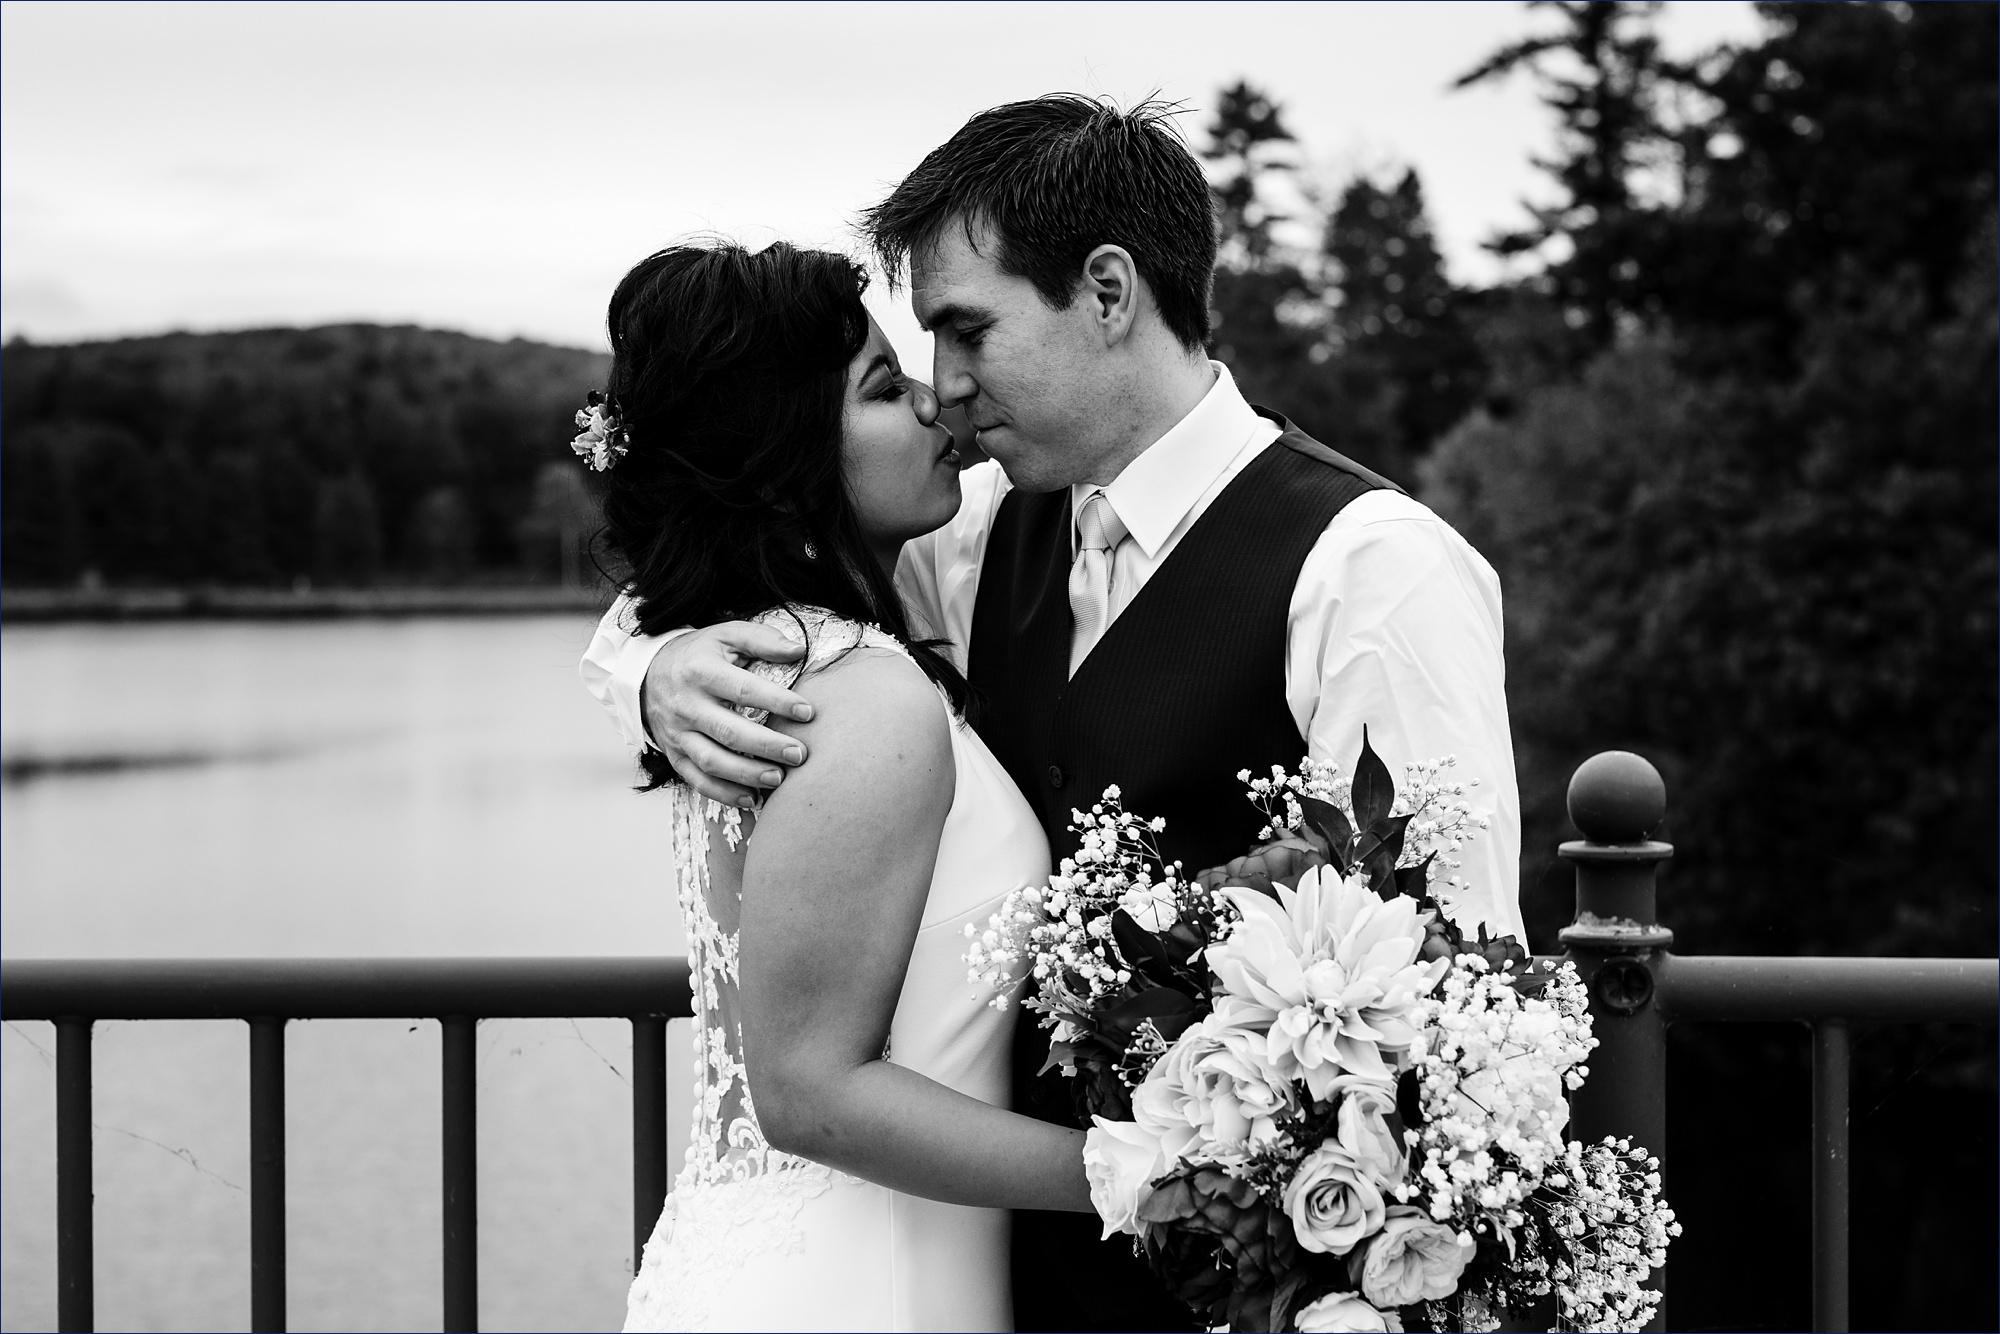 Face smushing and kisses on a scenic bridge after their Dartmouth NH elopement